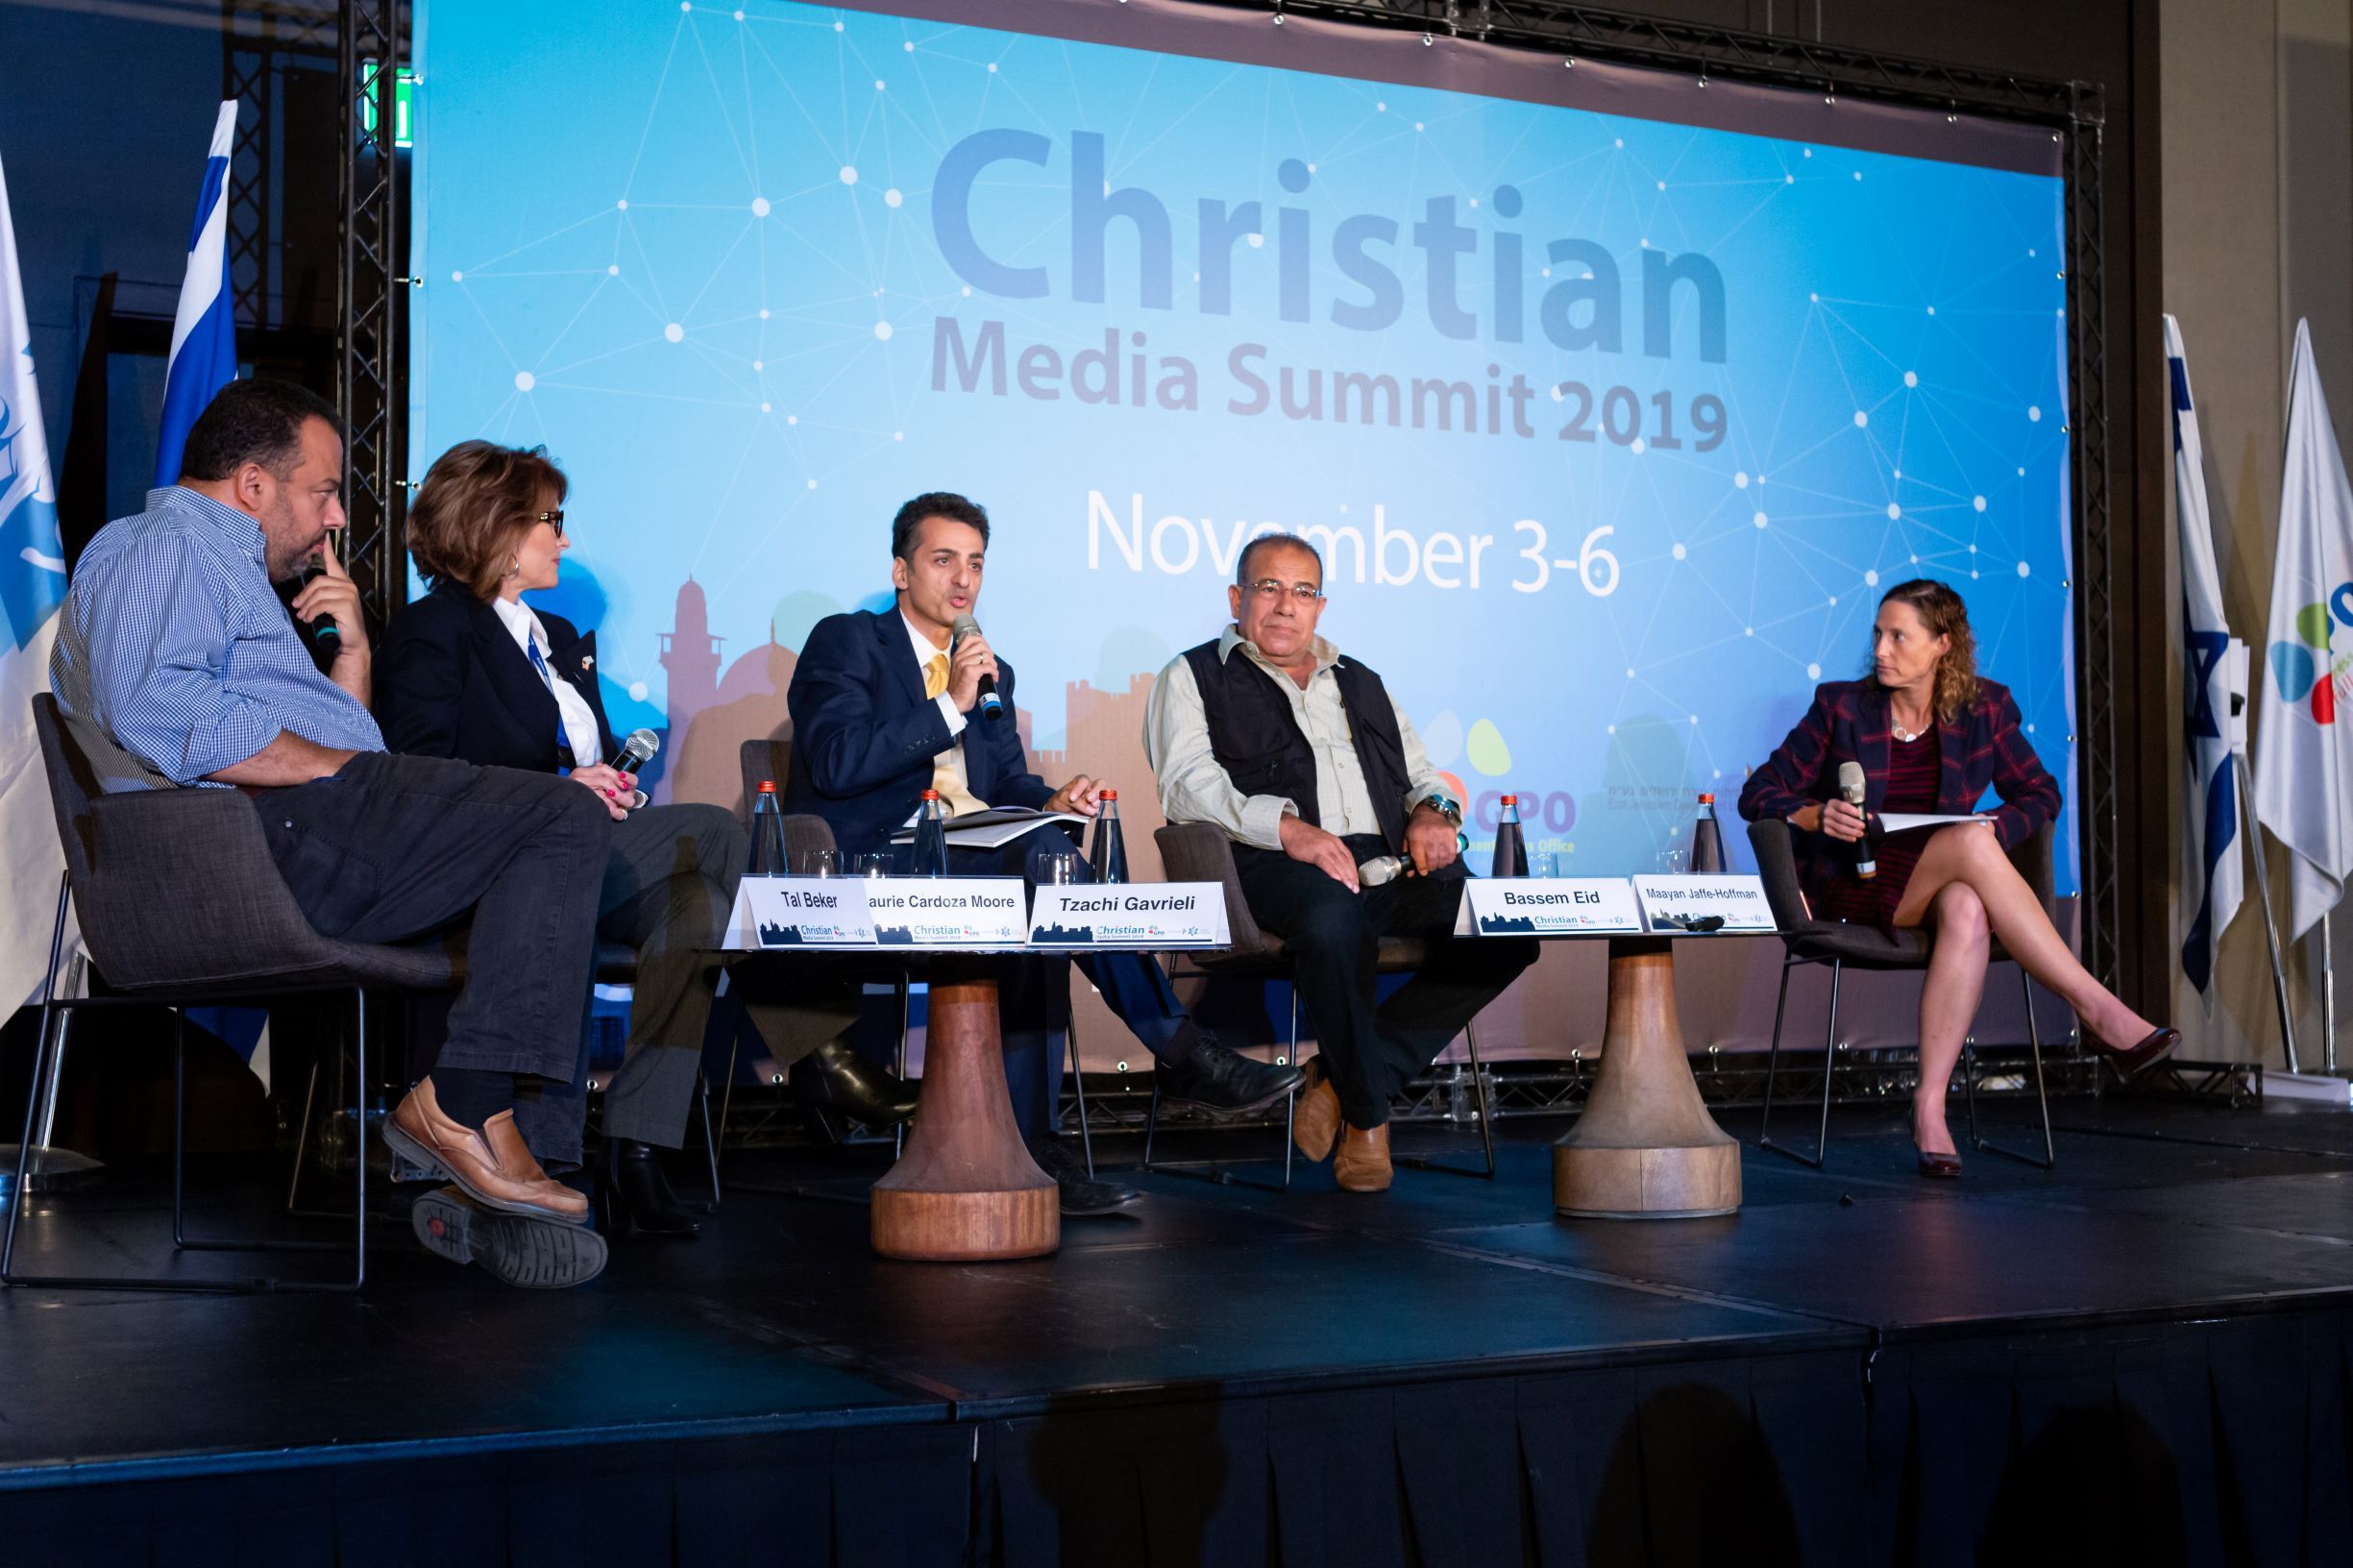 One of the third Christian Media Summit's panels on "BDS" took place on Nov. 4, 2019. 